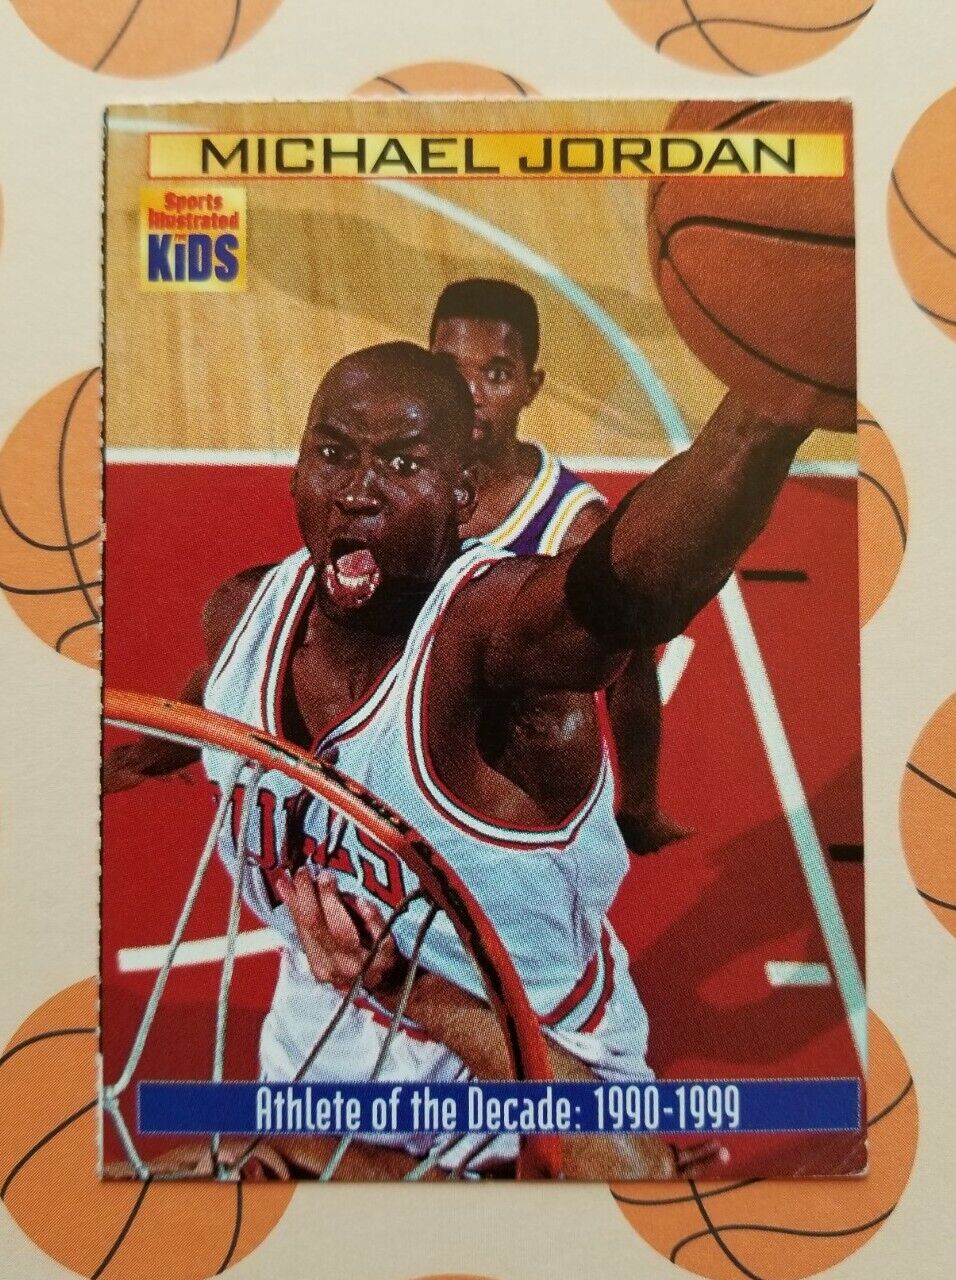 Michael Jordan 2000 Sports Illustrated For Kids Athlete of the Decade #871  Card | eBay